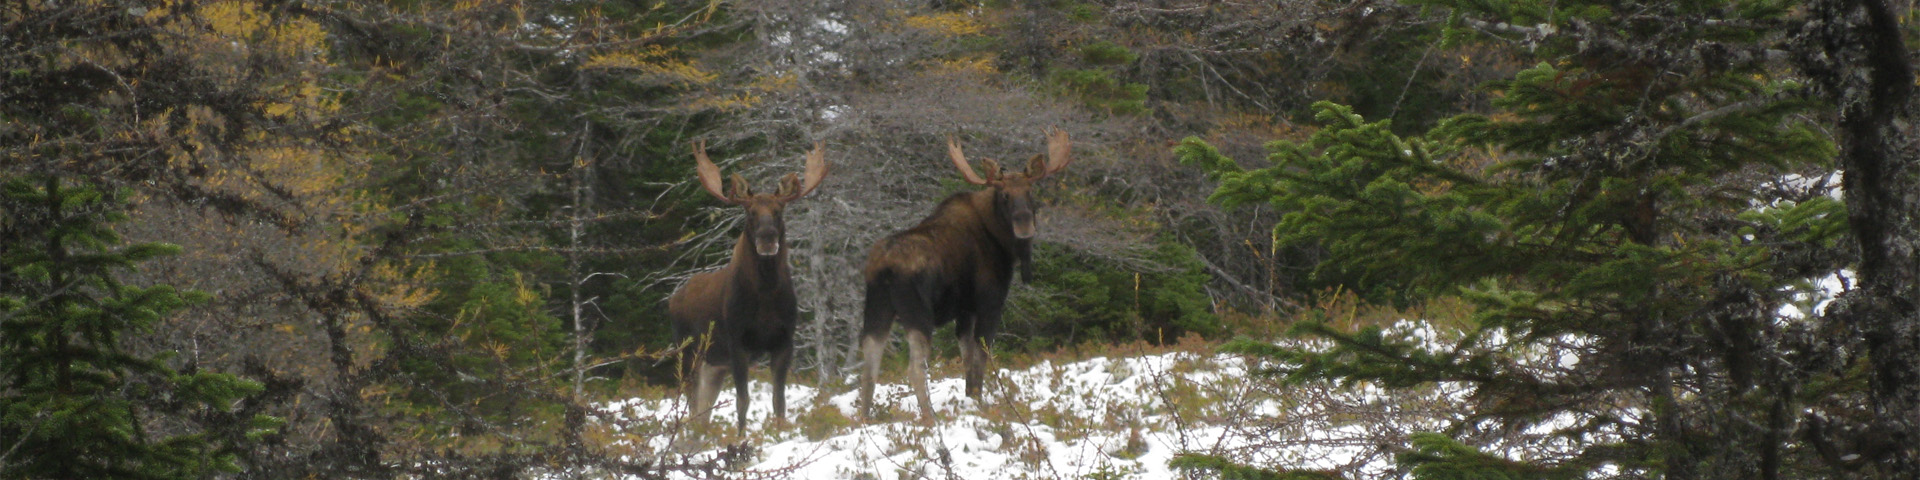 two moose standing in a snowy forest